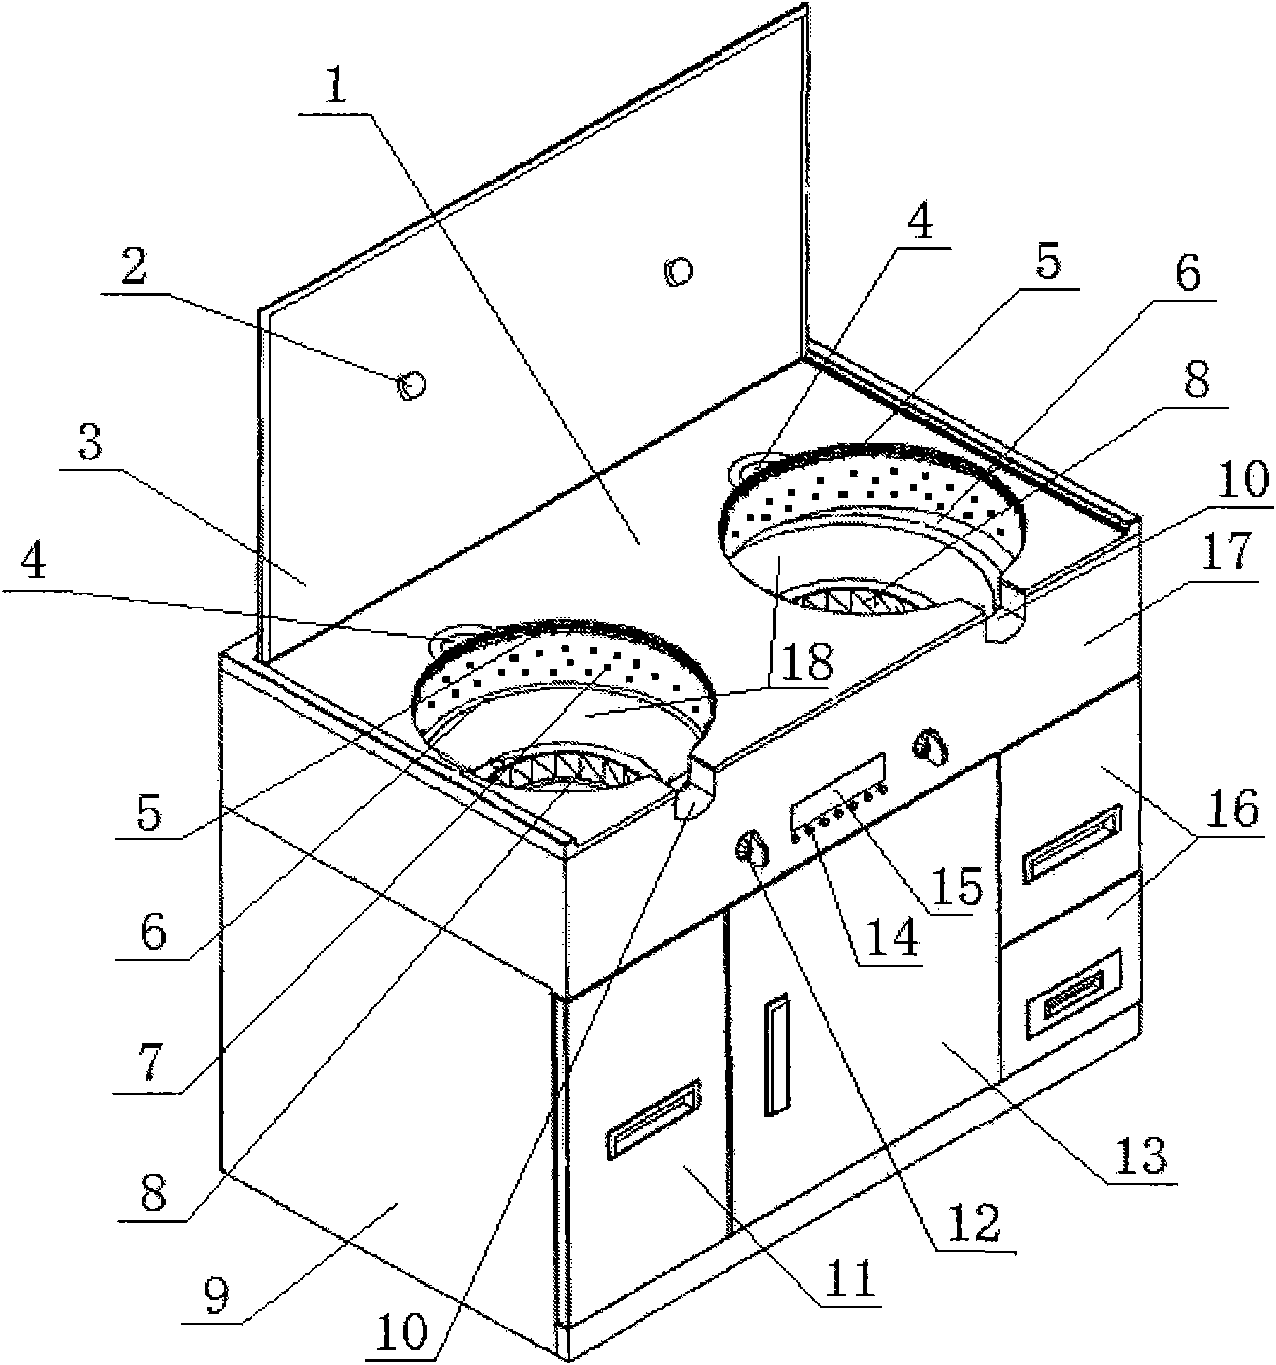 Integrated oven with combustion-supporting device